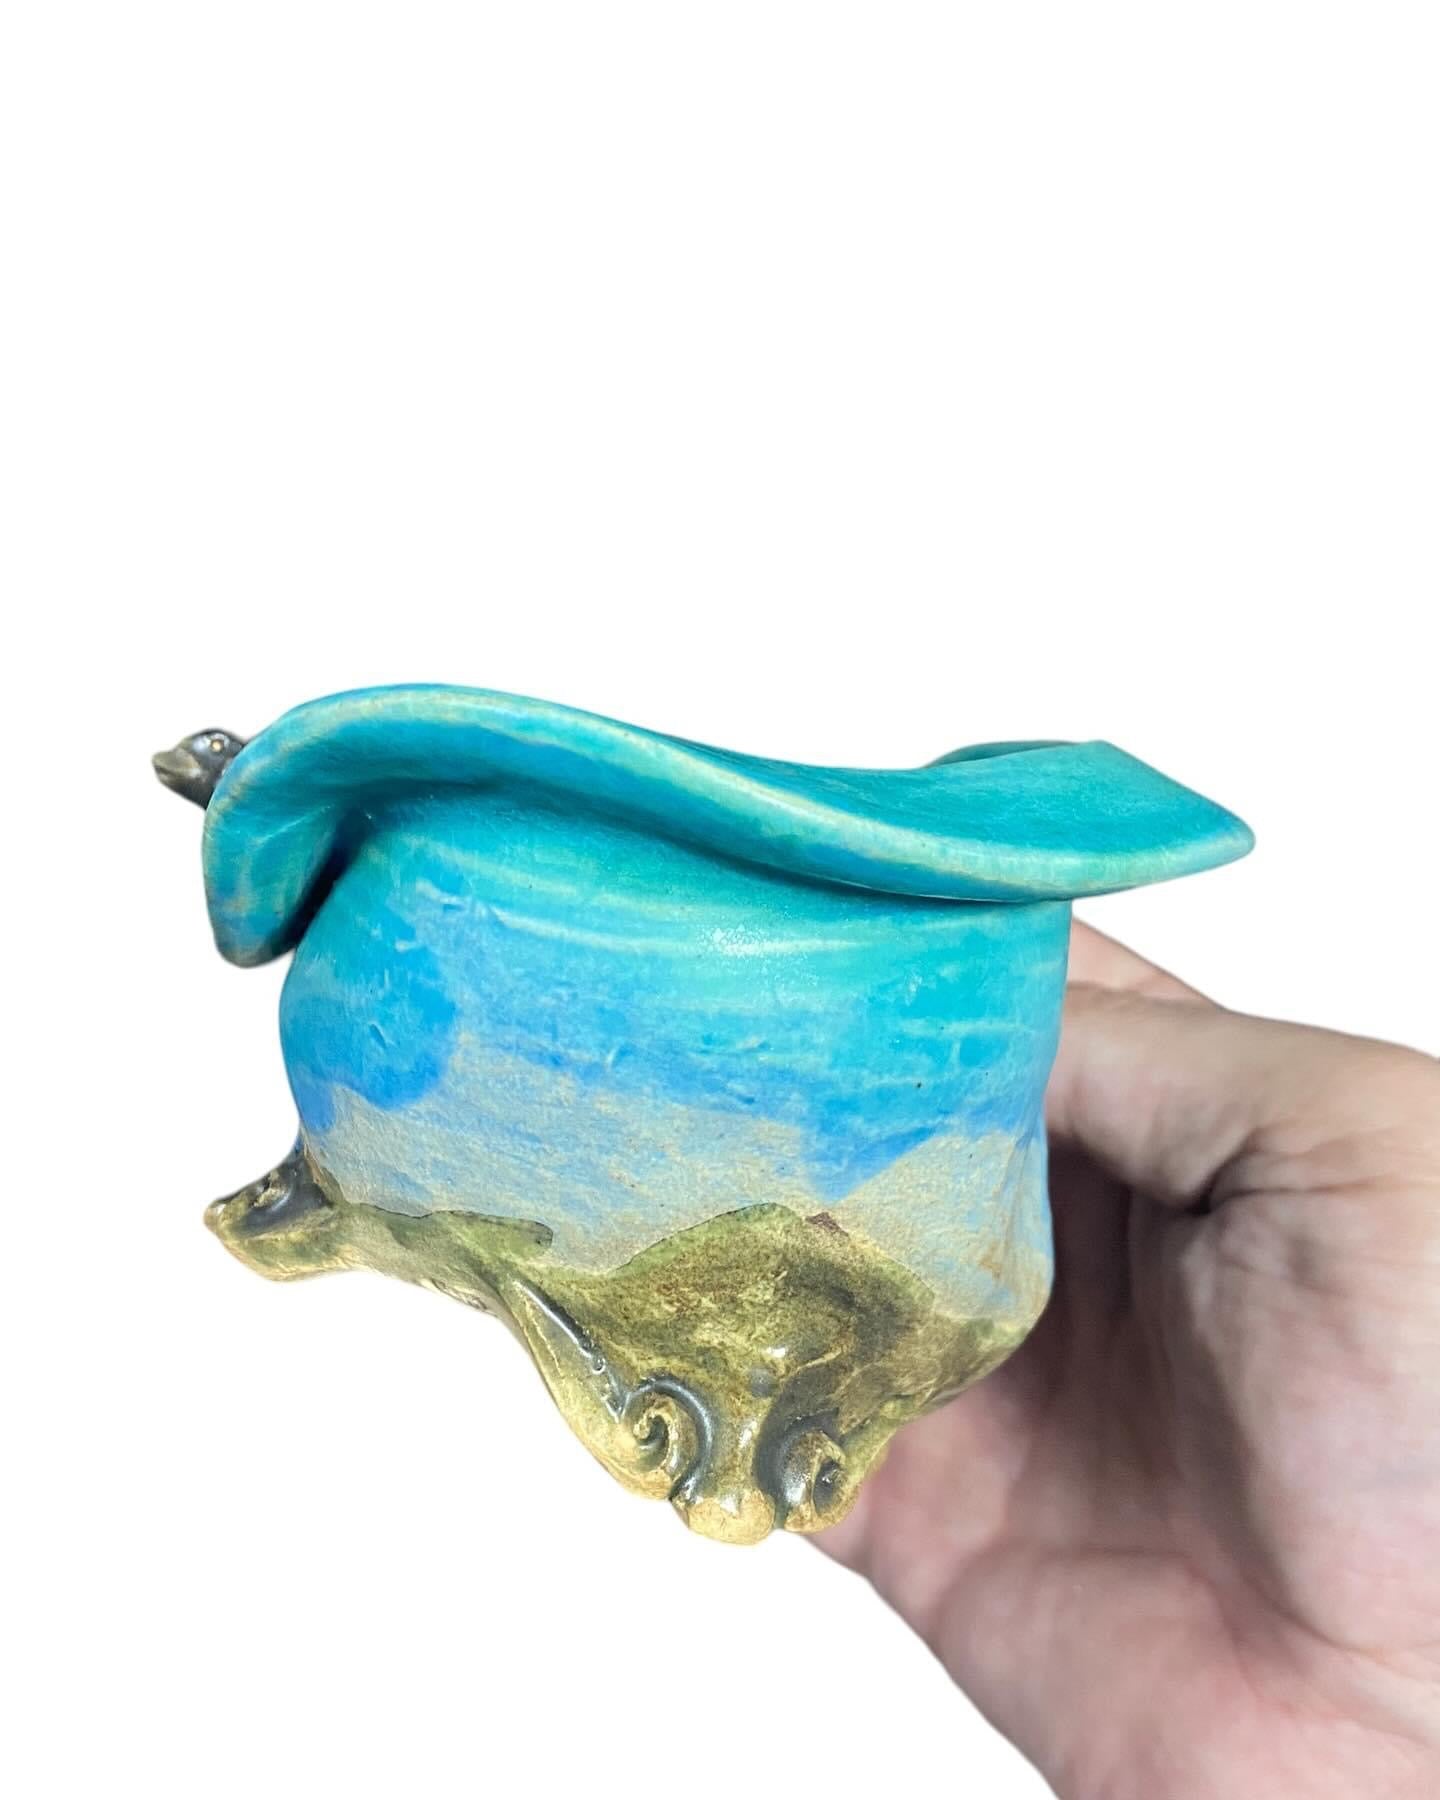 Masashi - Frog on Floppy Bonsai or Accent Pot (6-1/4” wide)